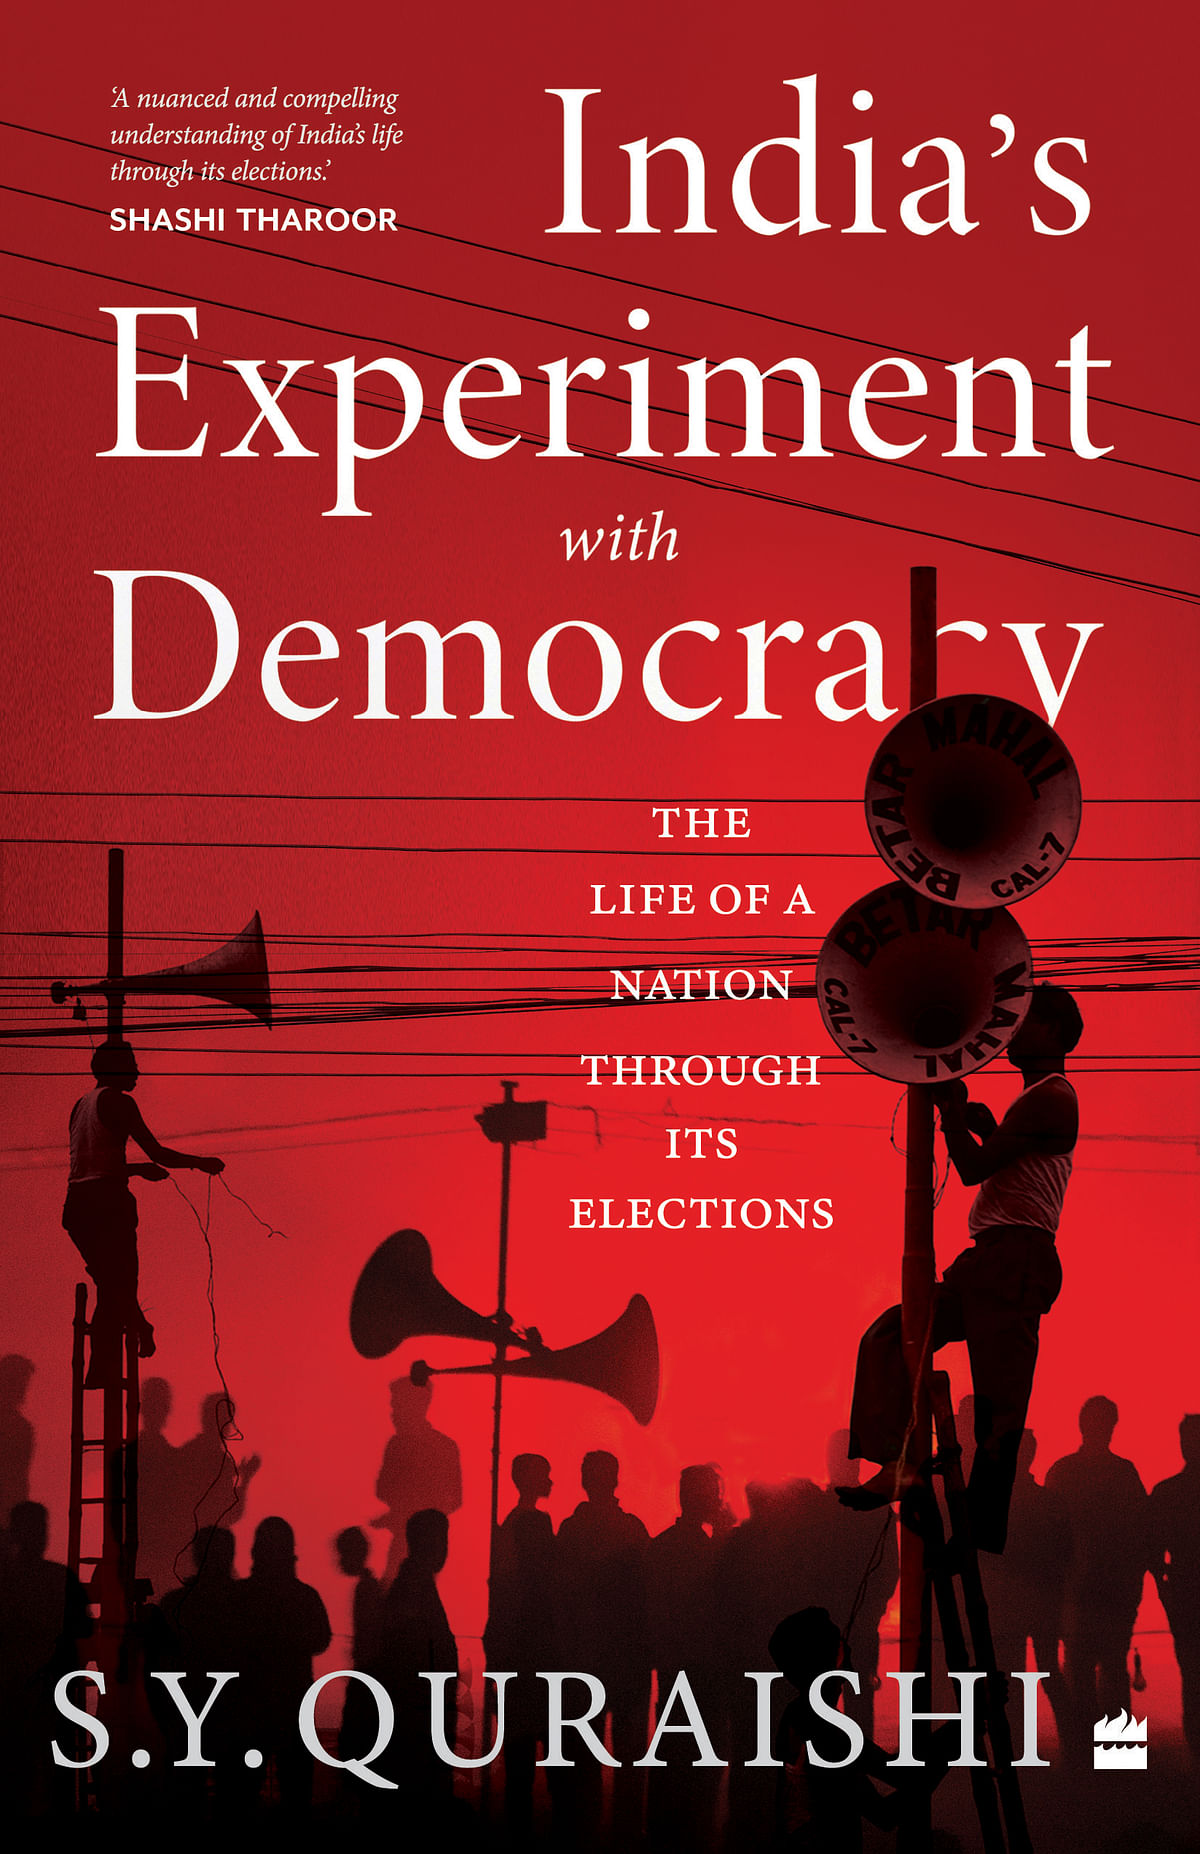 A sneak peak into former Chief Election Commissioner SY Quraishi's new book: 'India's Experiment With Democracy.'